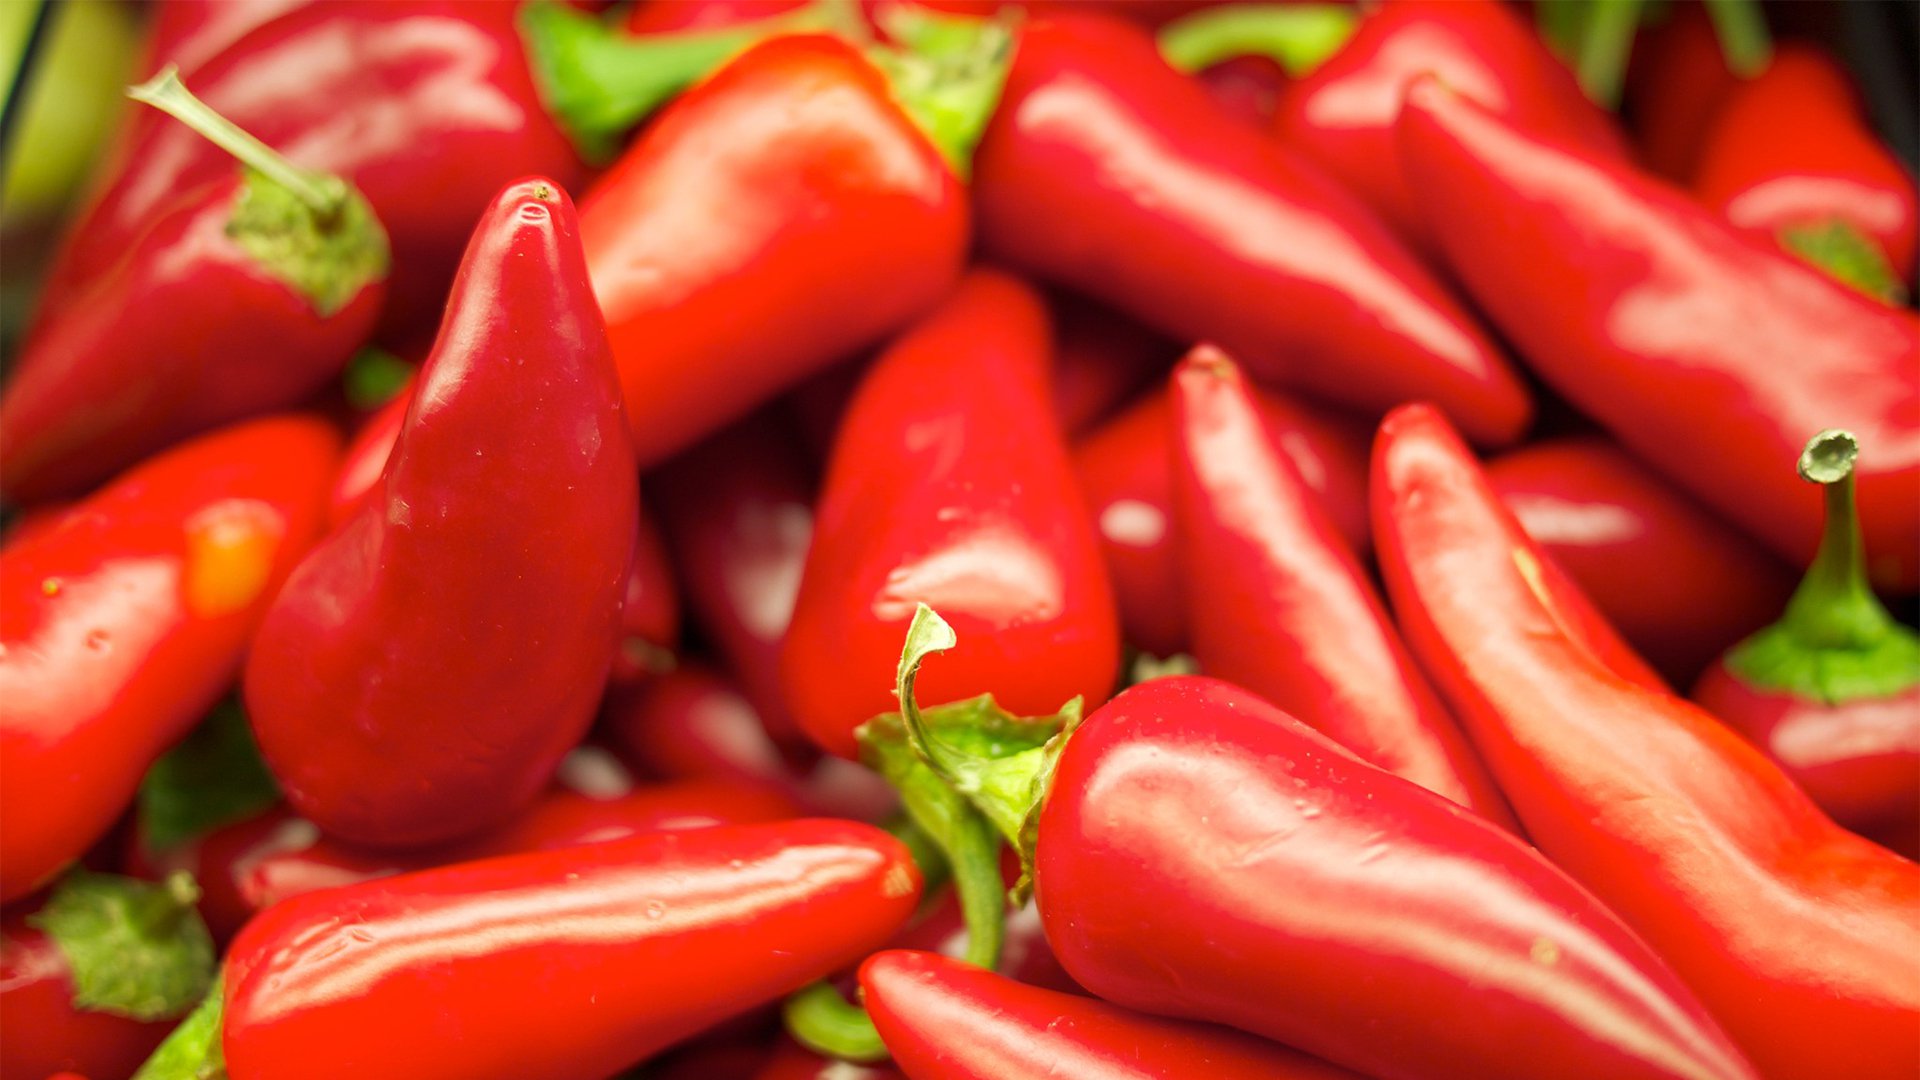 what chemicals make chili peppers hot and spicy and why are some hotter than others